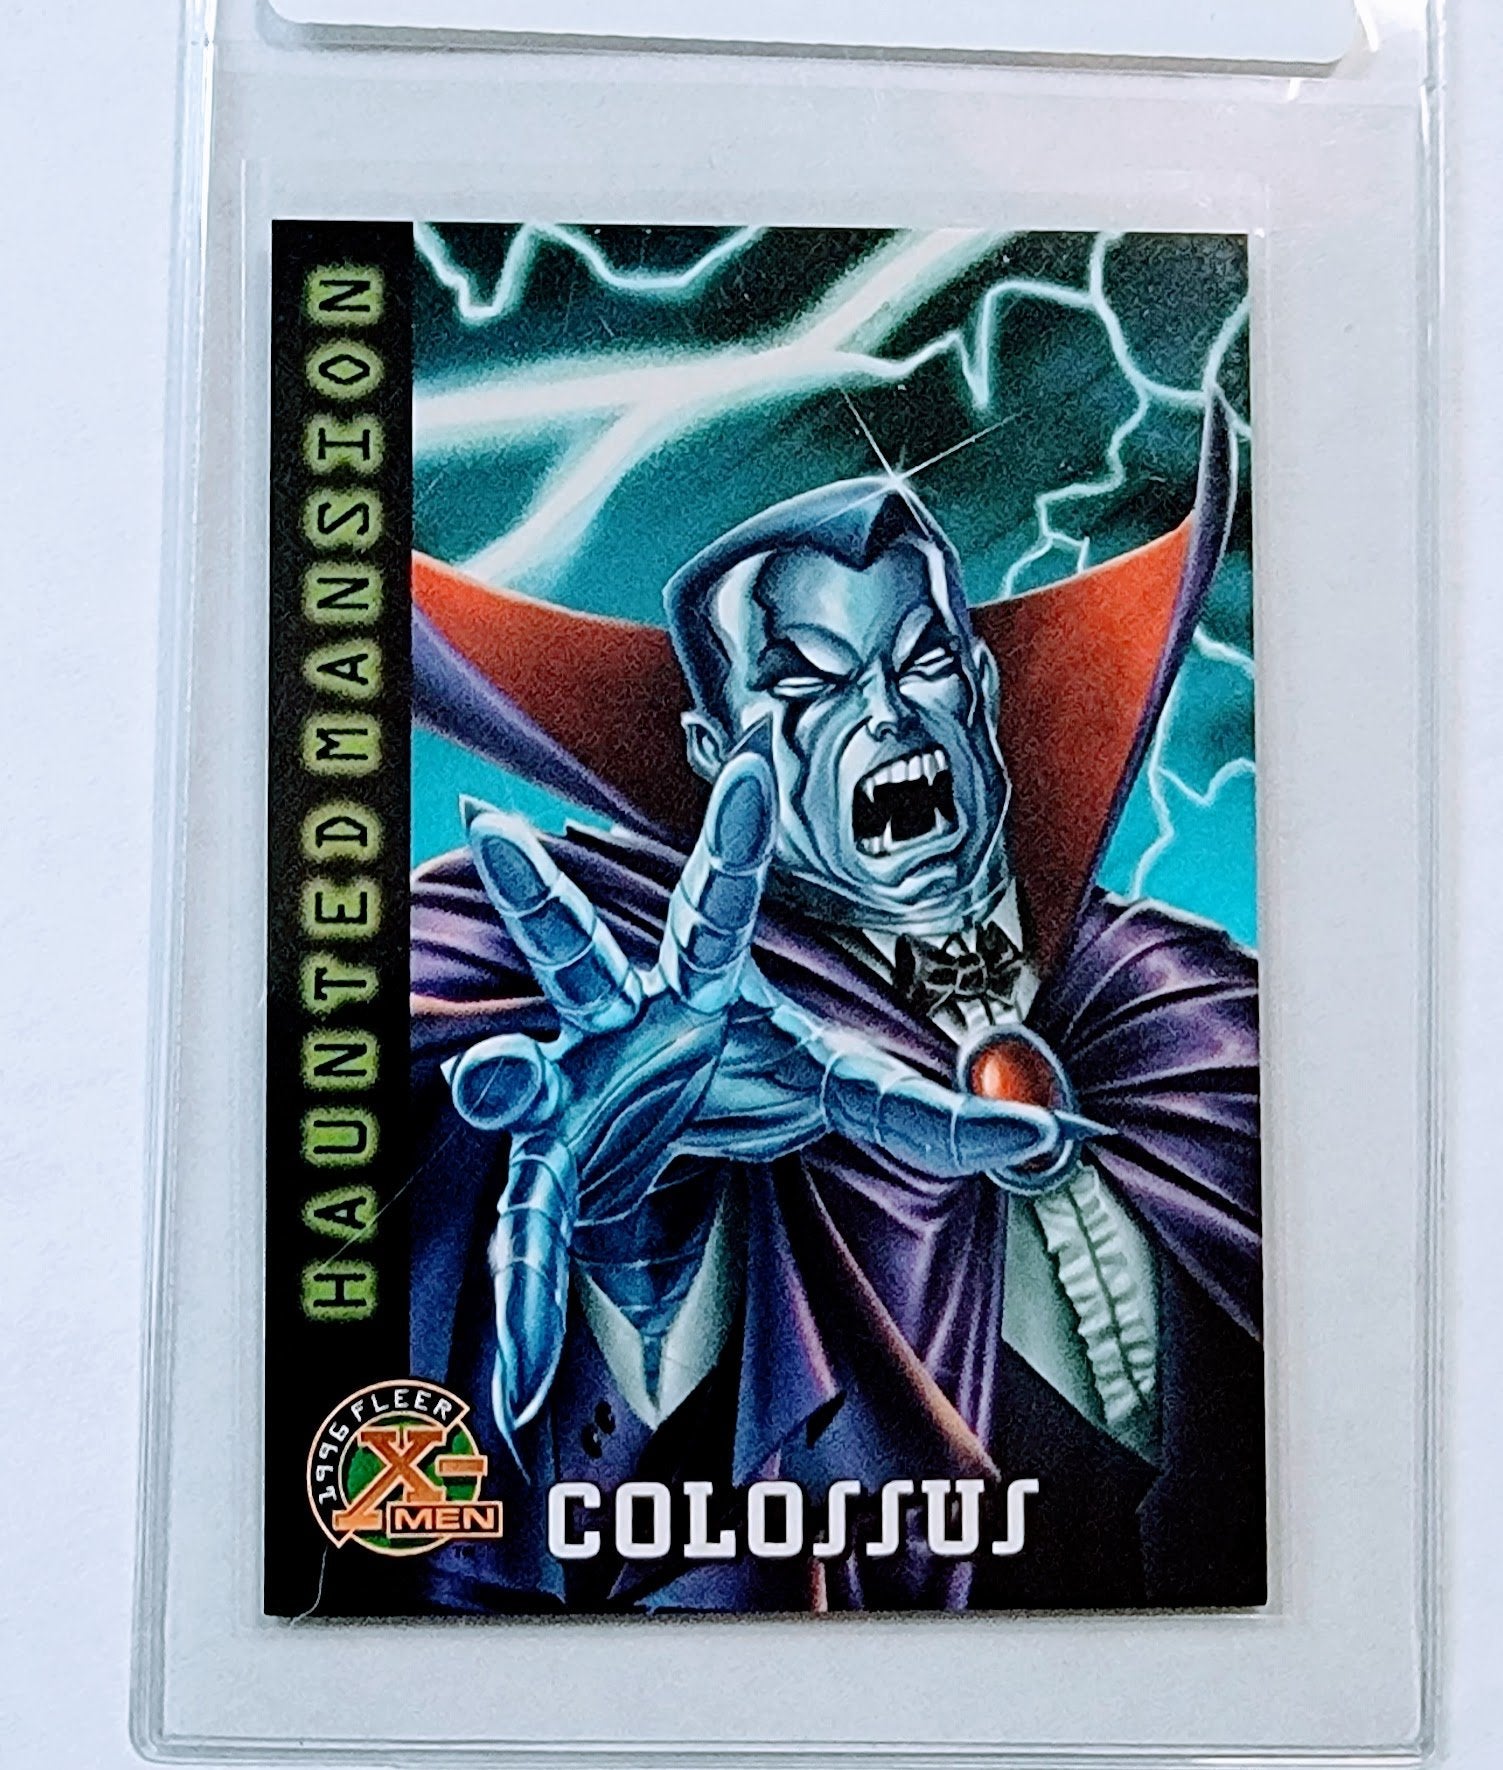 1996 Fleer X-Men Colussus Haunted Mansion Marvel Trading Card AVM1 simple Xclusive Collectibles   